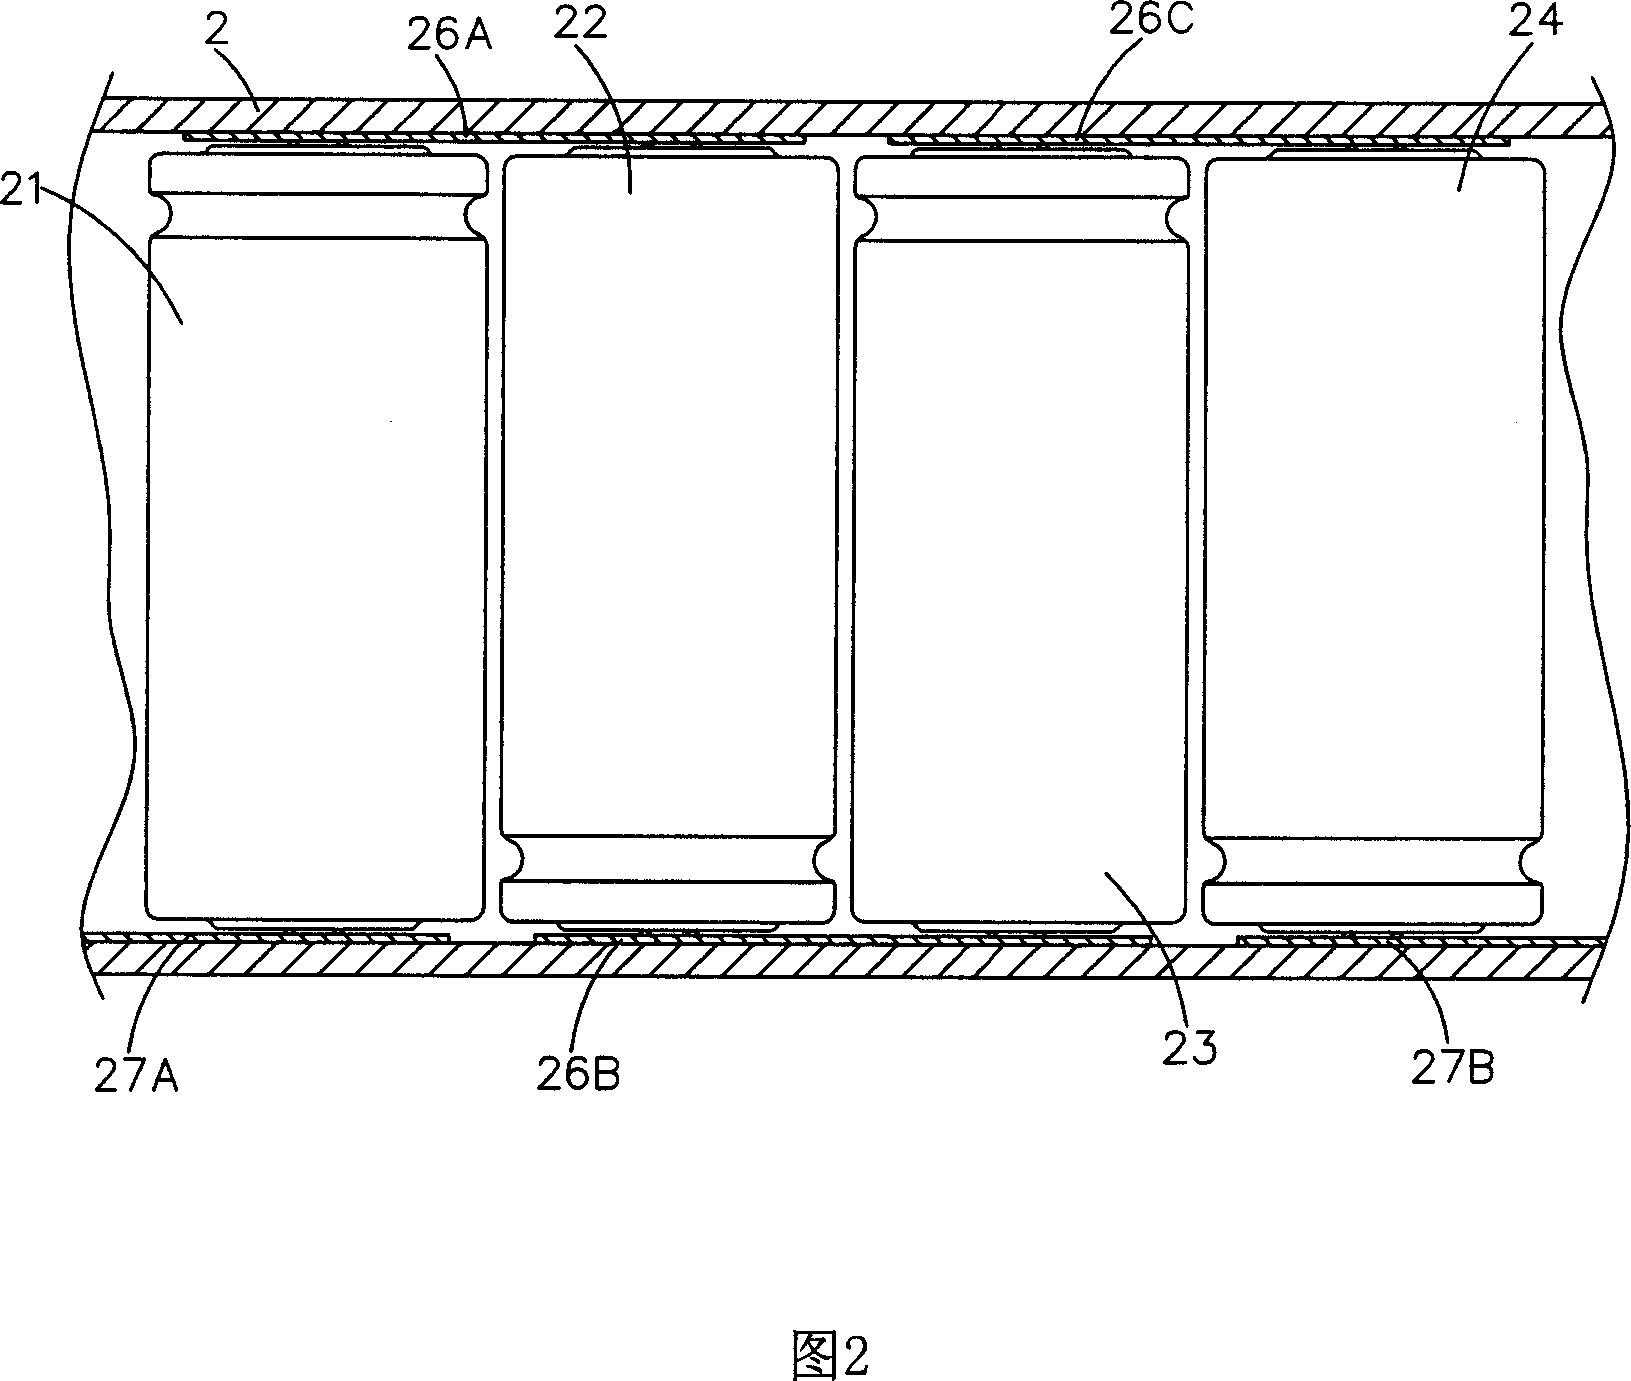 Battery connecting wafer structure